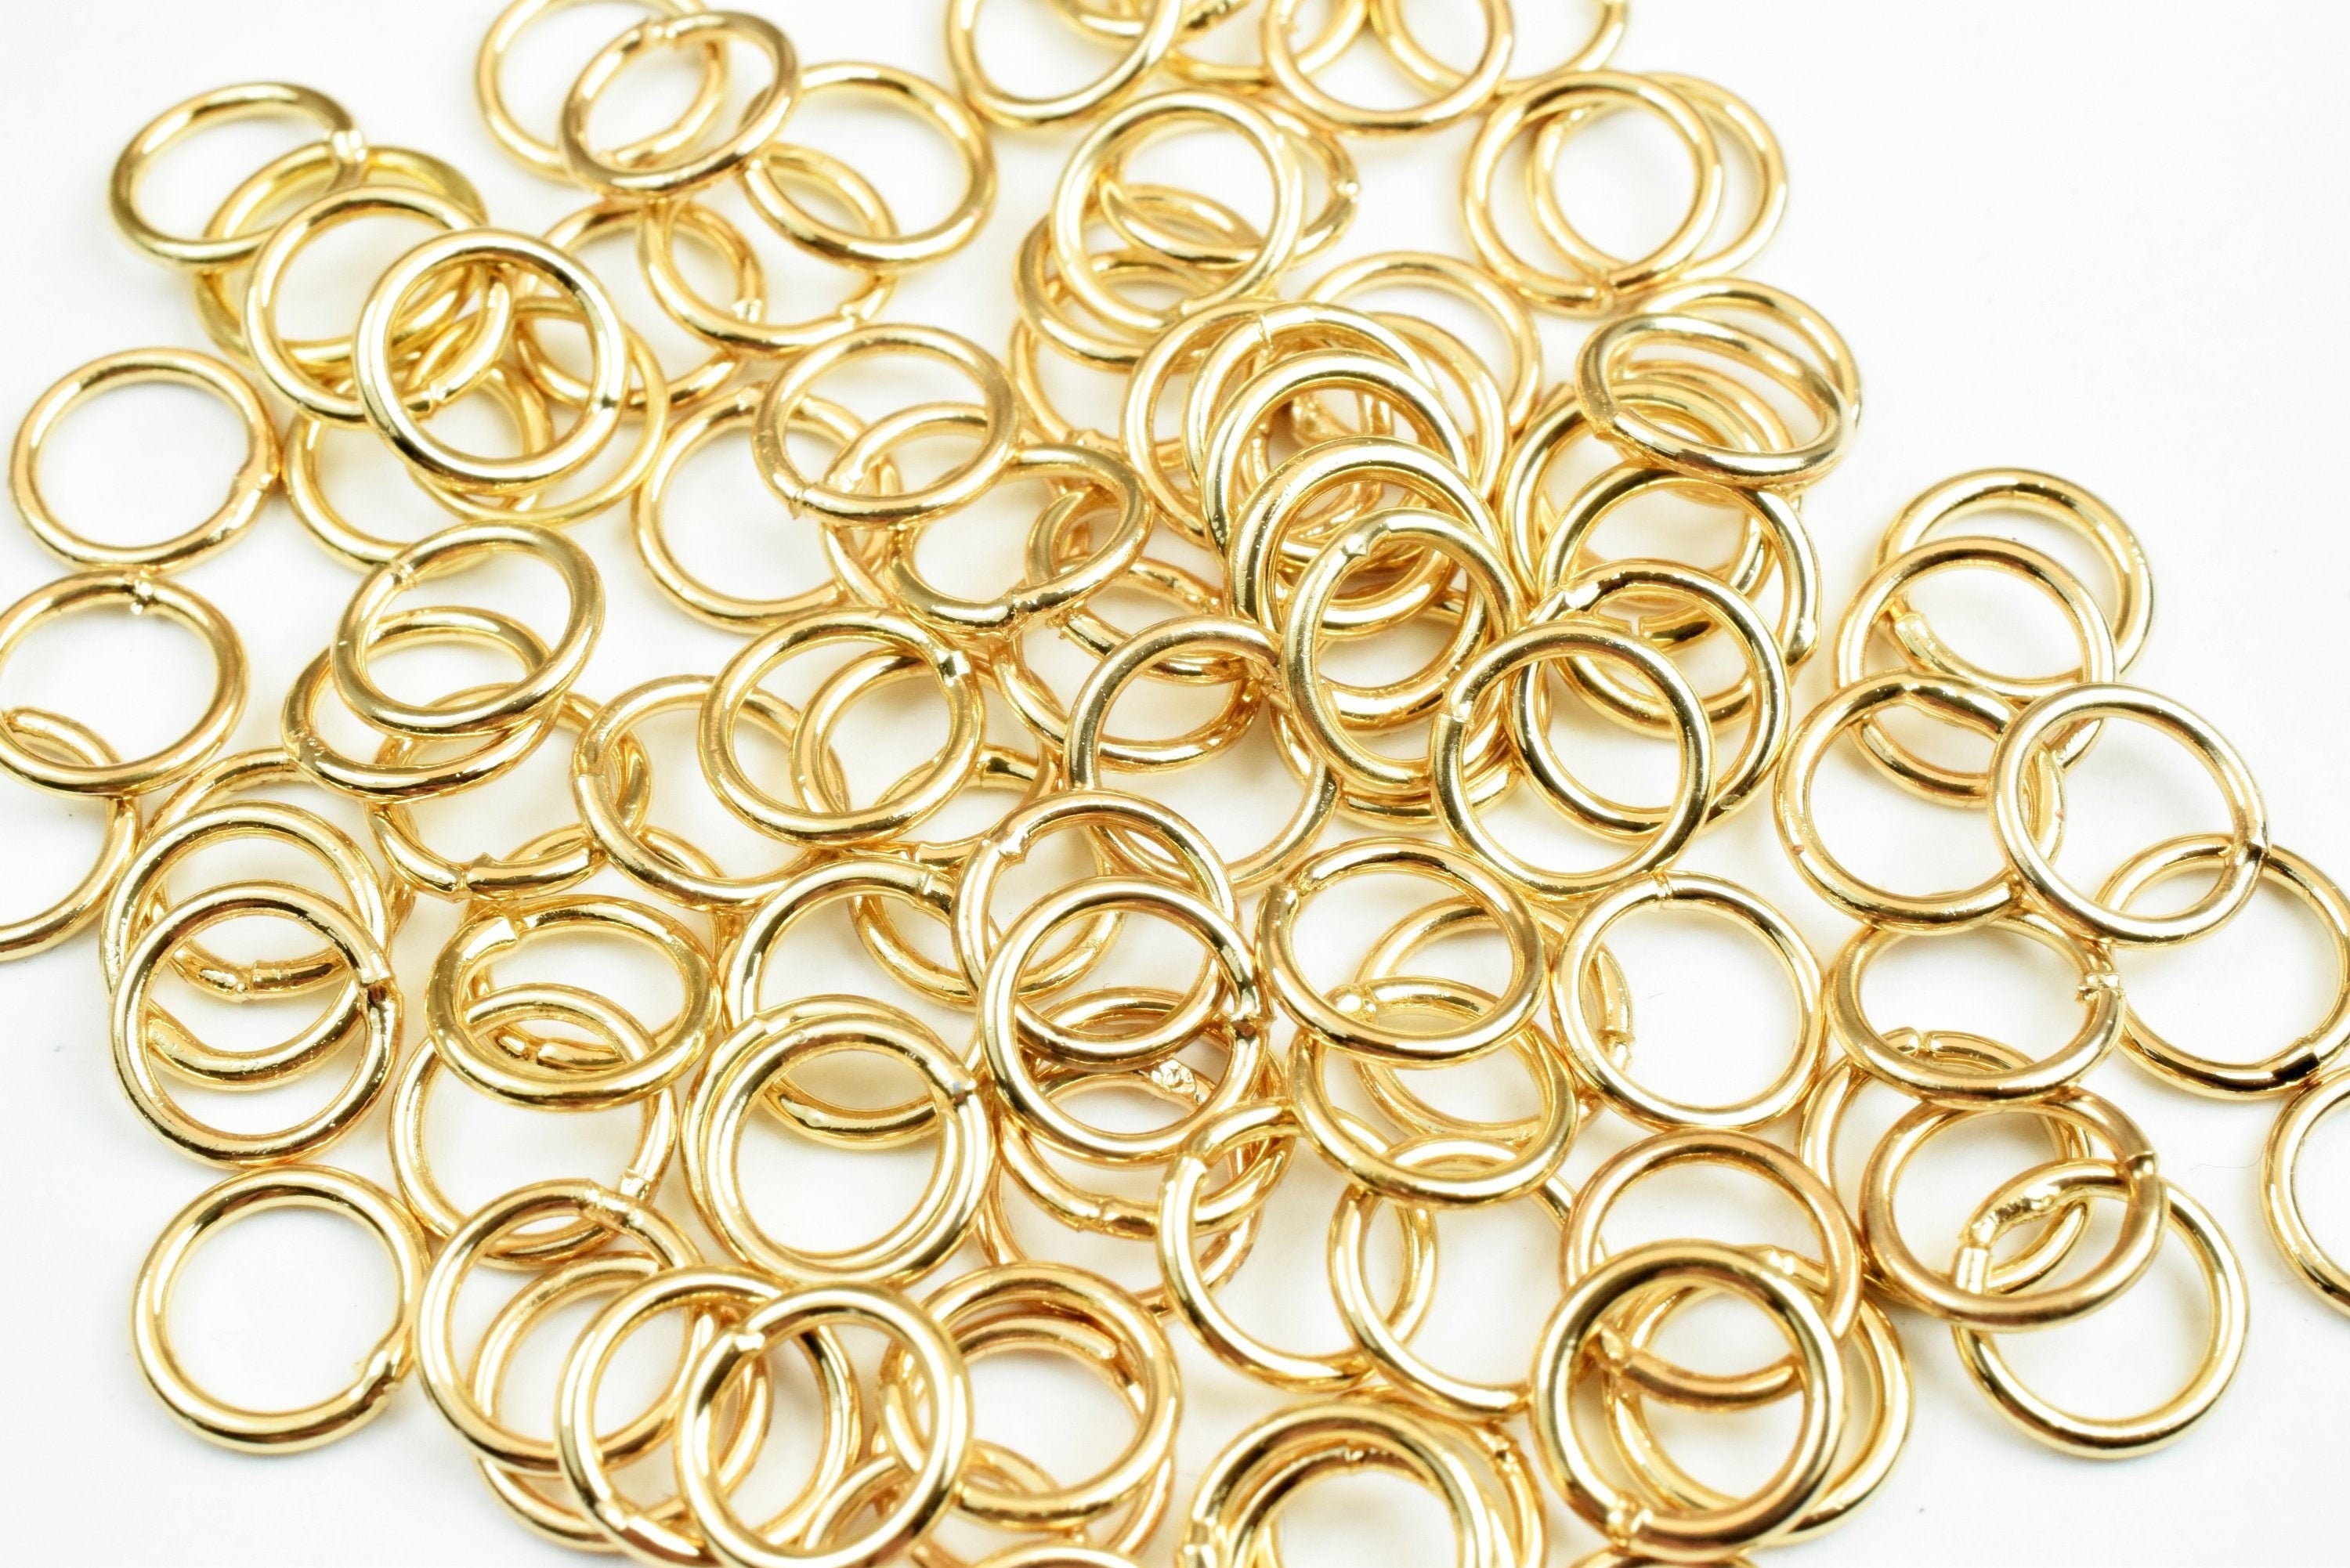  600Pcs Twist Open Jump Rings, 8/10/12/15mm O Rings Connectors  Jewelry Findings Round Circle Large Jump Rings for Jewelry Making DIY  Earrings Bracelet Necklace Keychain Pendants Crafts(K Gold,White K)